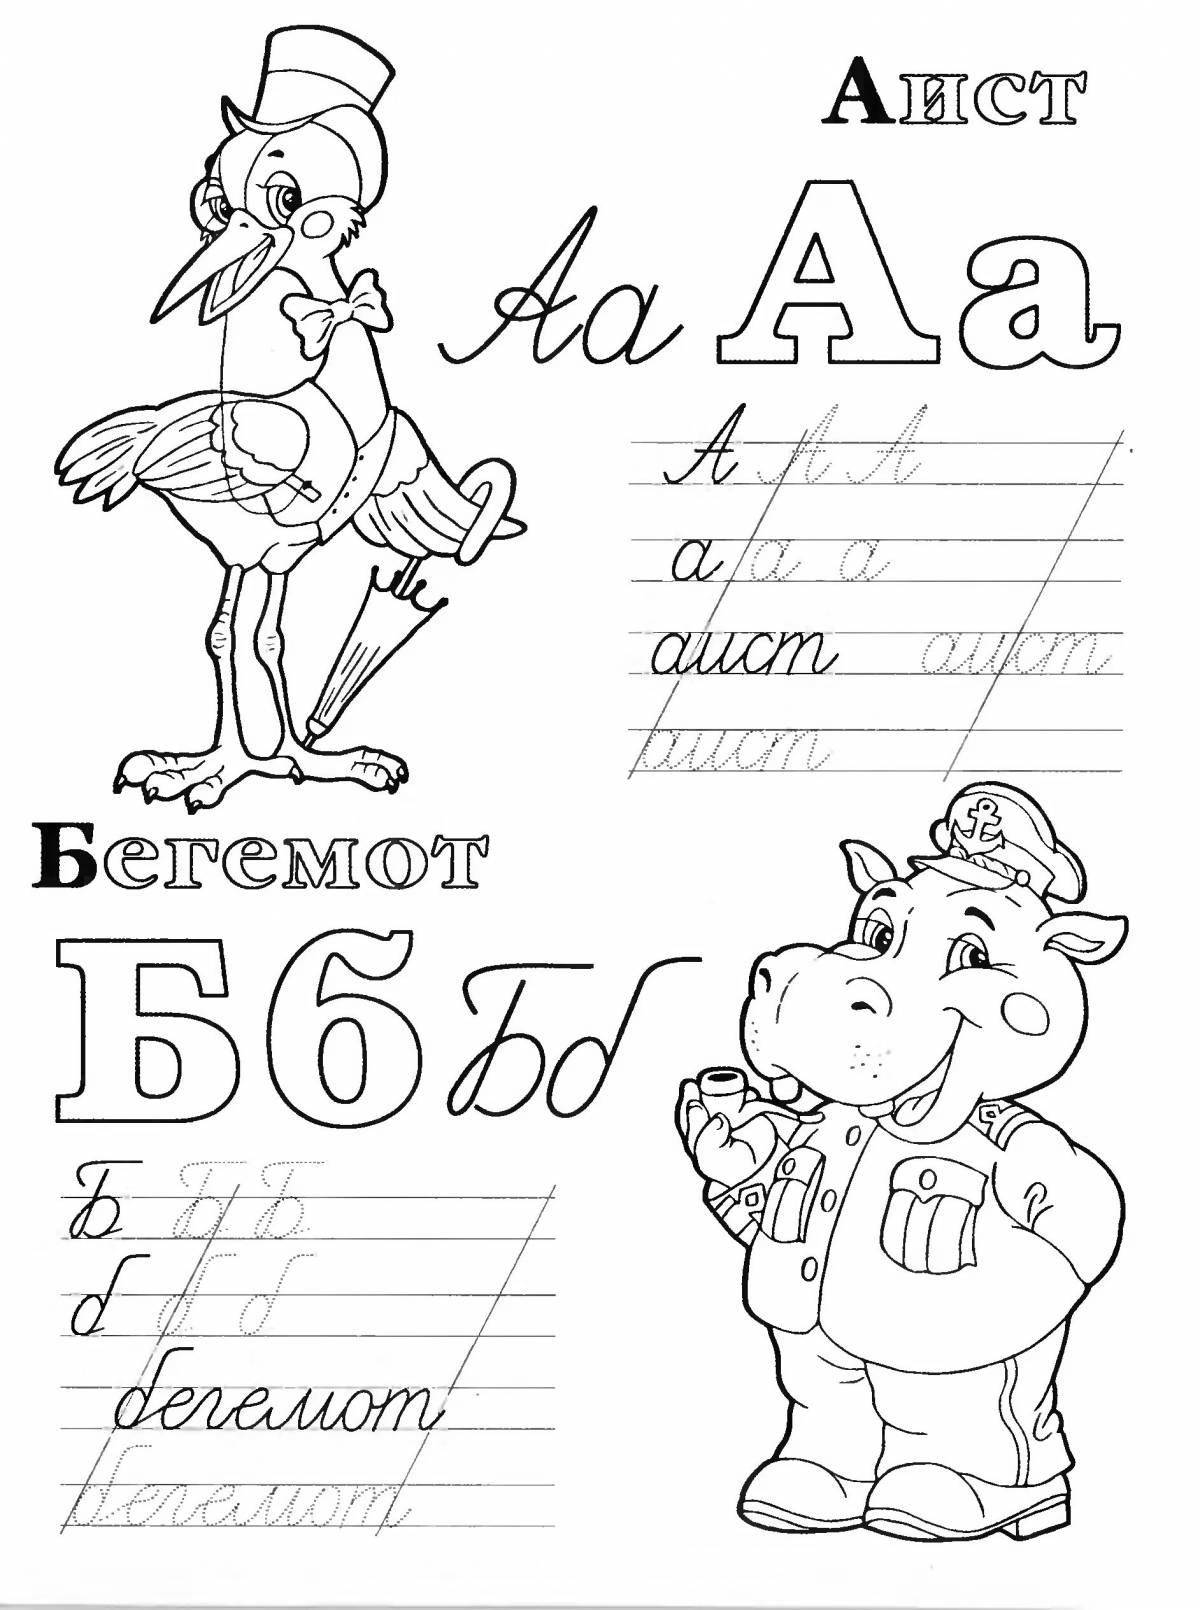 Entertaining coloring spelling of the alphabet